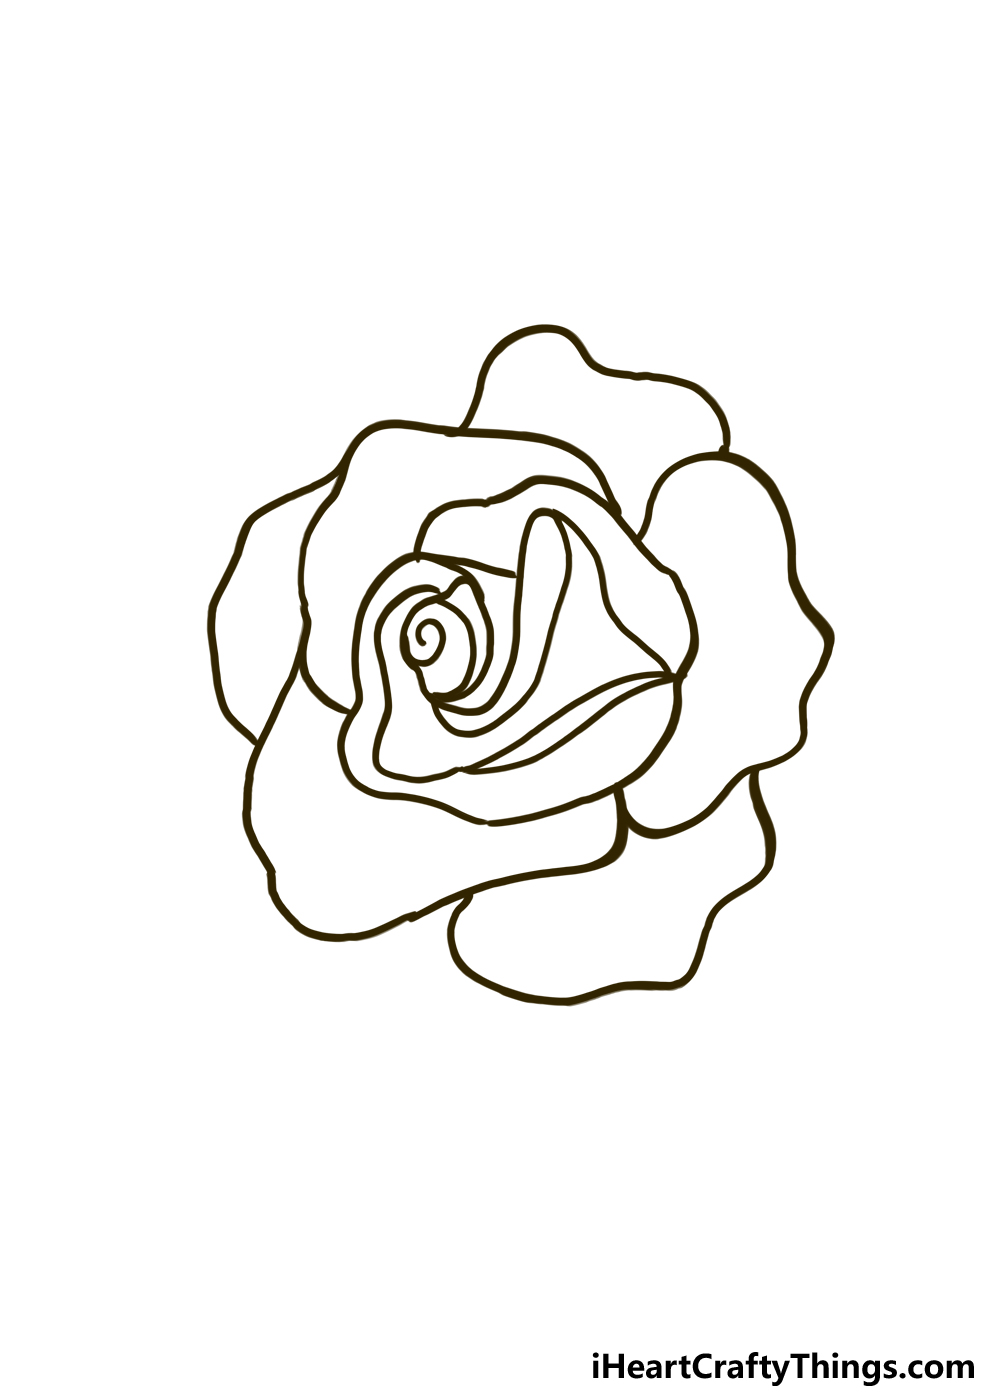 How to Draw A Rose Tattoo step 4